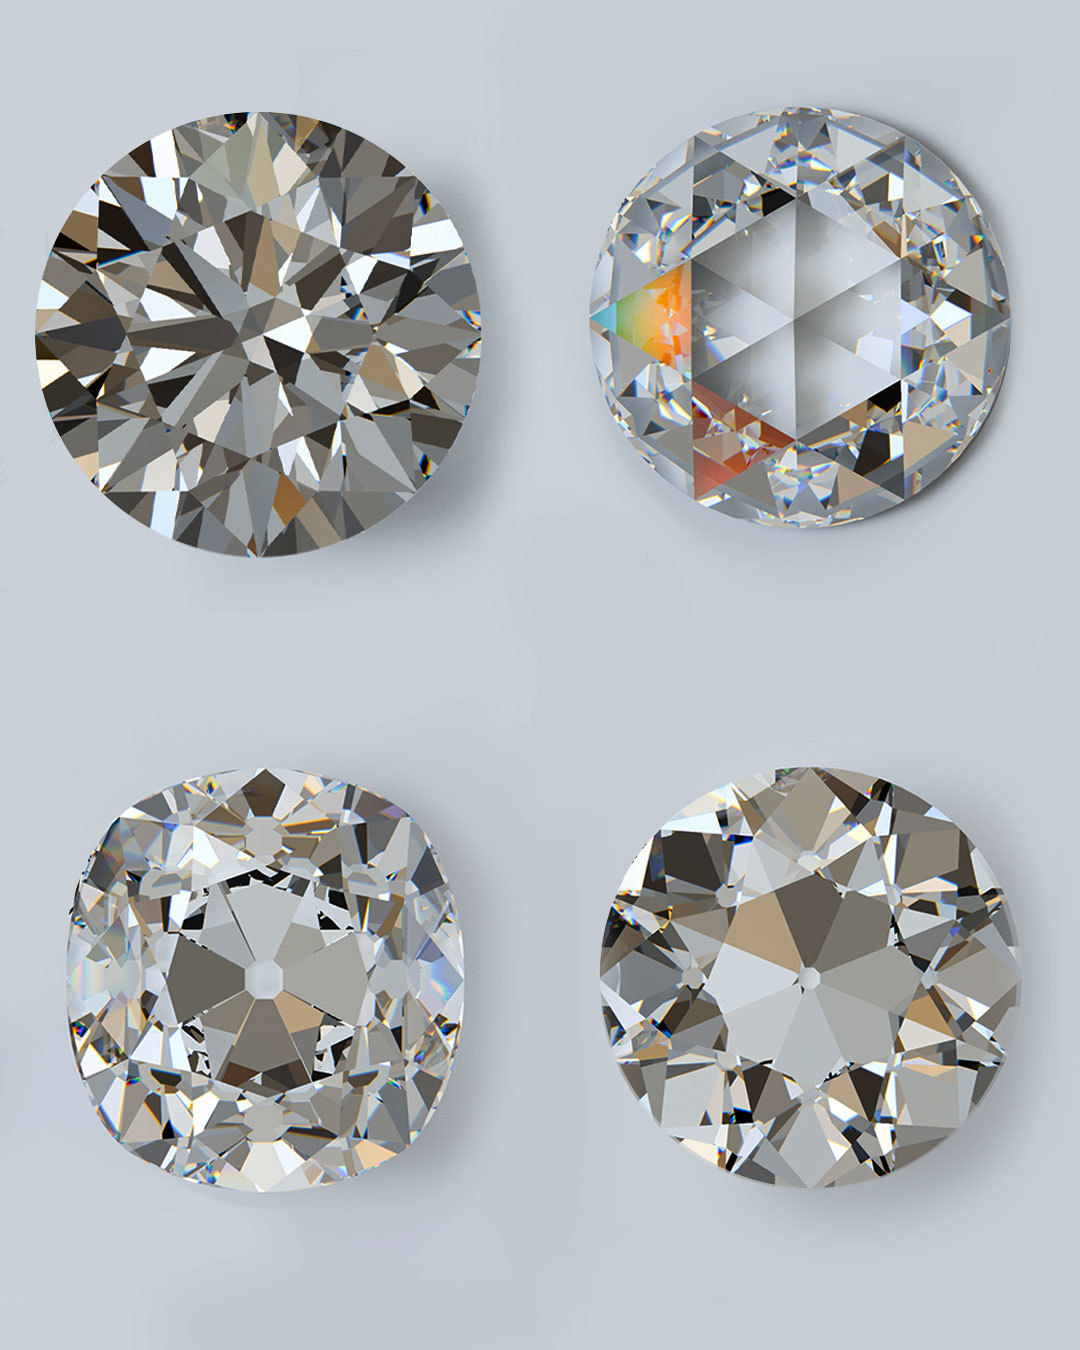 Crash course: Diamond cuts & shapes - what are the differences?